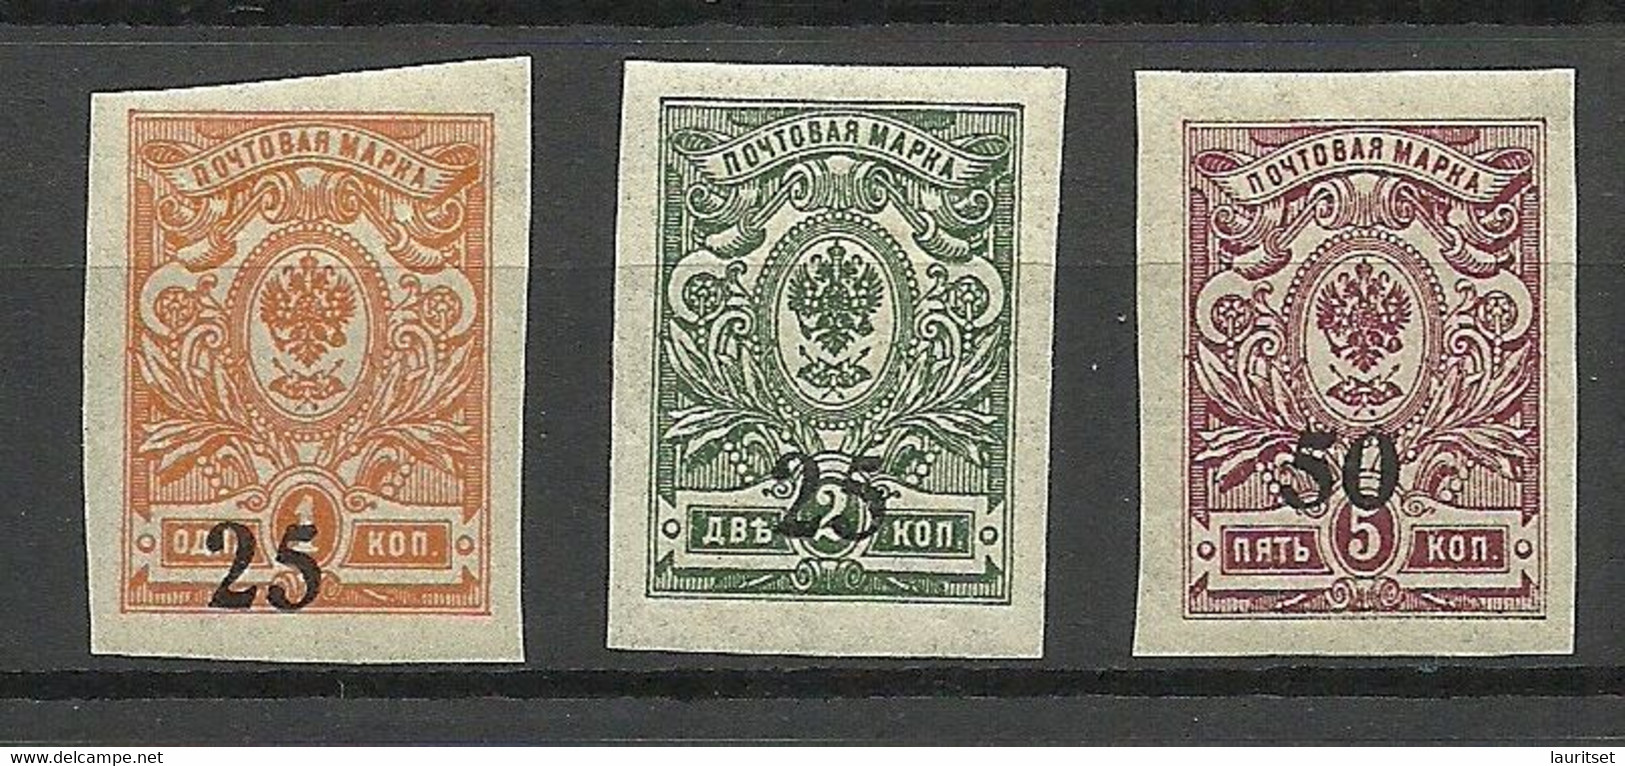 RUSSLAND RUSSIA 1919 Civil War Novoczerkassk, 3 Imperforated Values MNH/MH - South-Russia Army